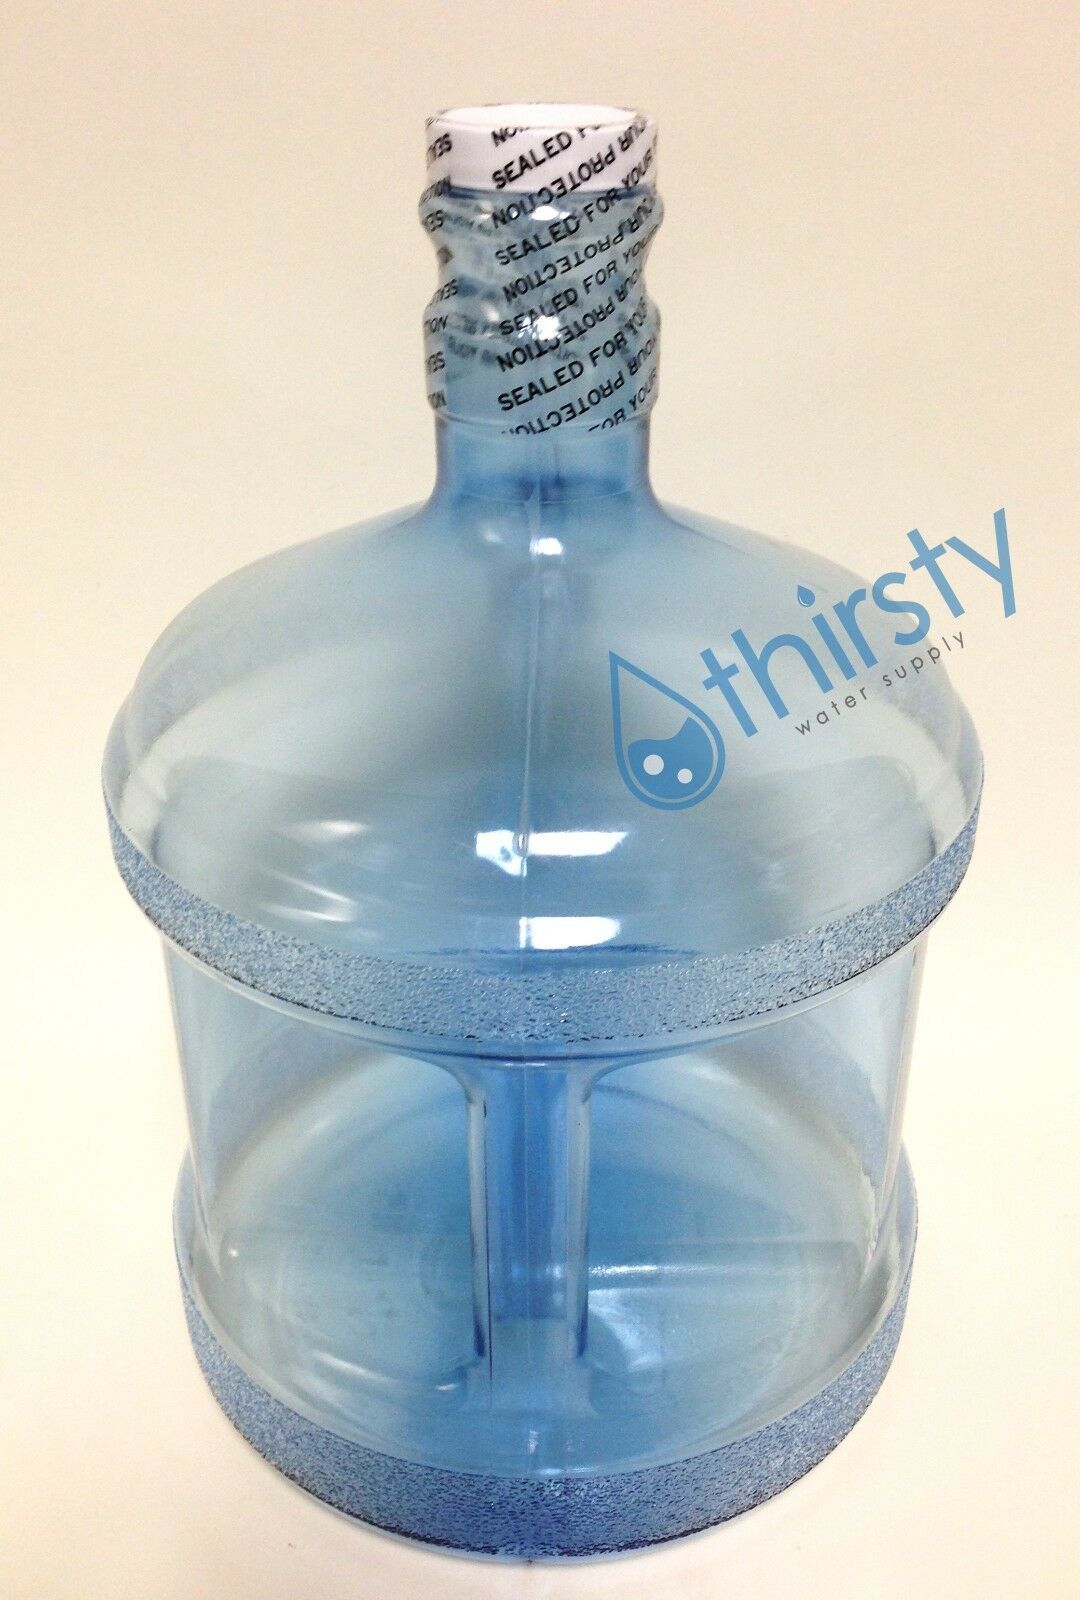 1 Gallon Black Polycarbonate Water Bottle Jug Container Drinking Aqua H2O New 